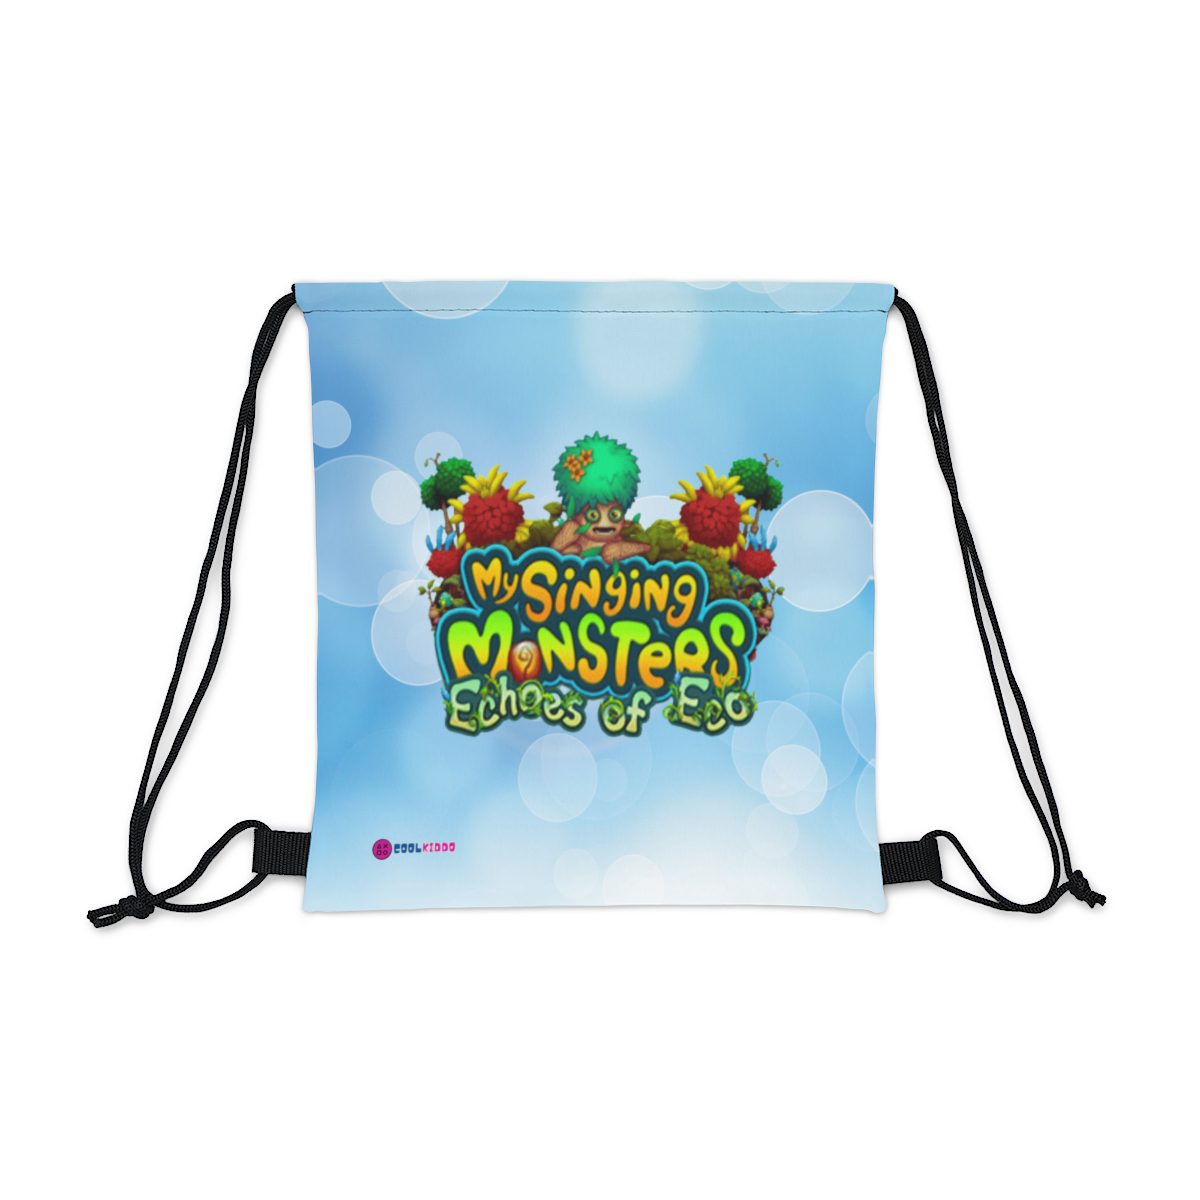 My Singing Monsters Echoes of Eco Blue and Green Drawstring Bag Cool Kiddo 10